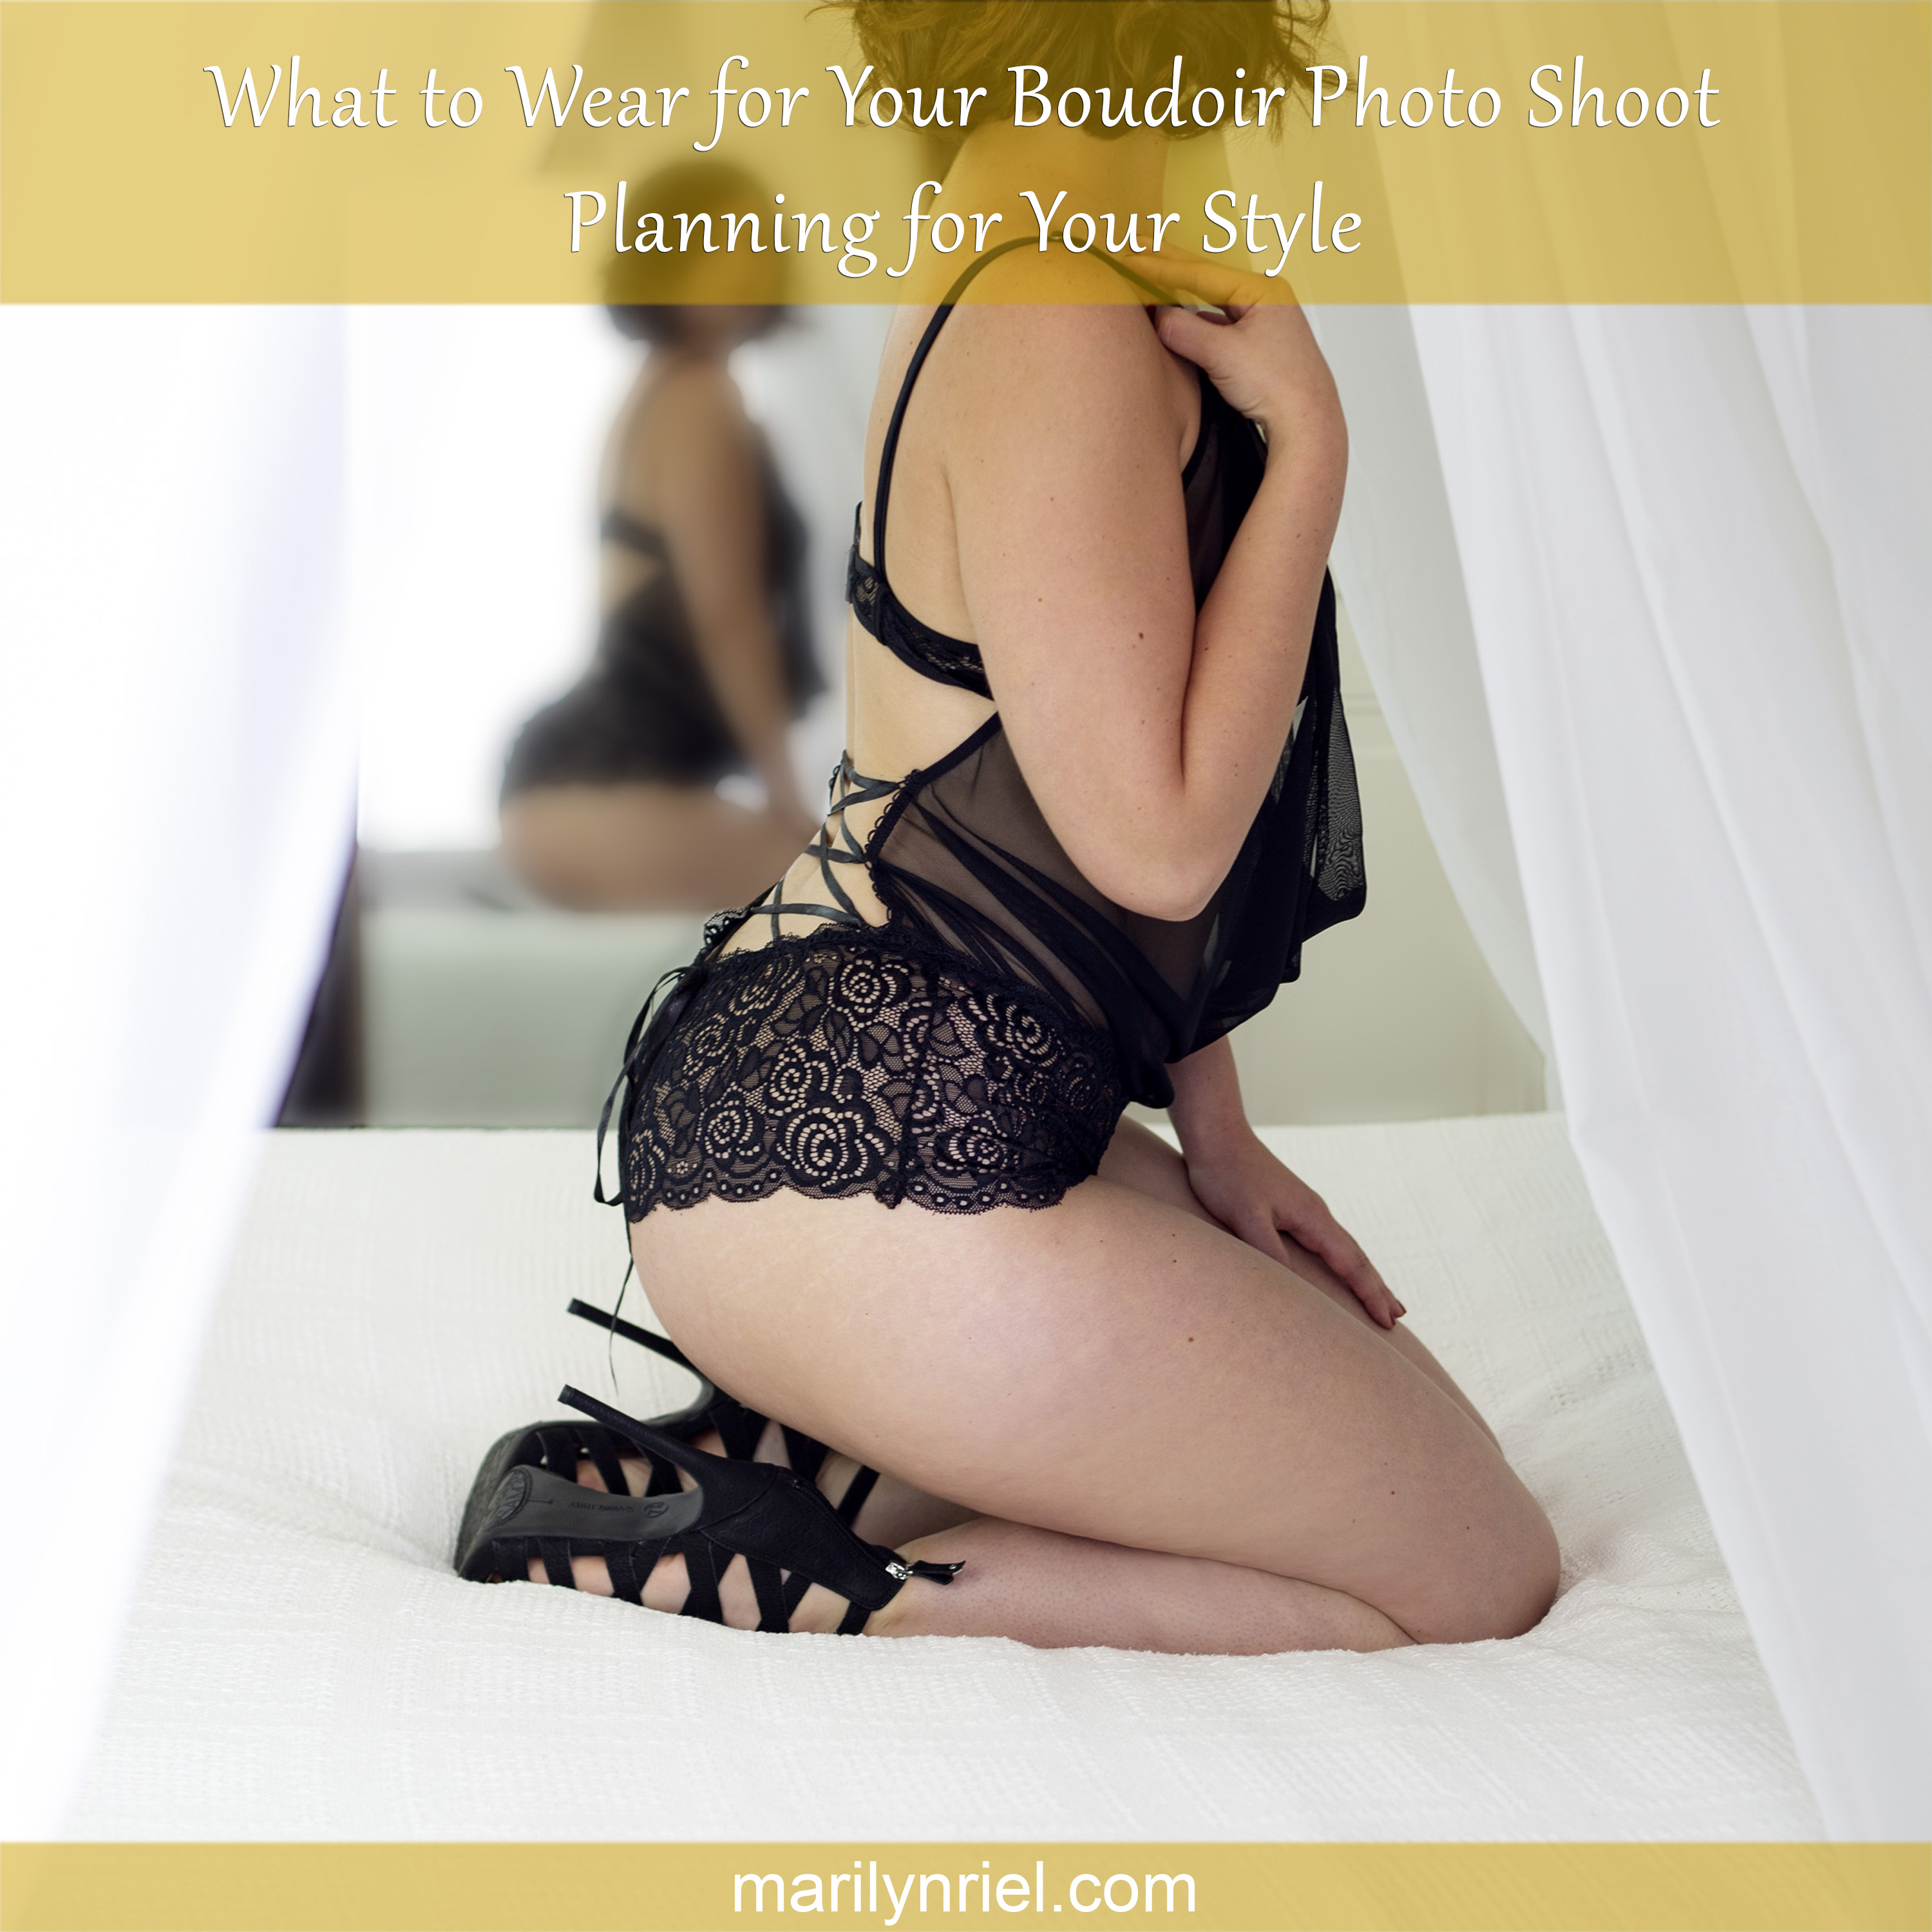 Sheer black teddy and high heels to wear for your boudoir photo shoot